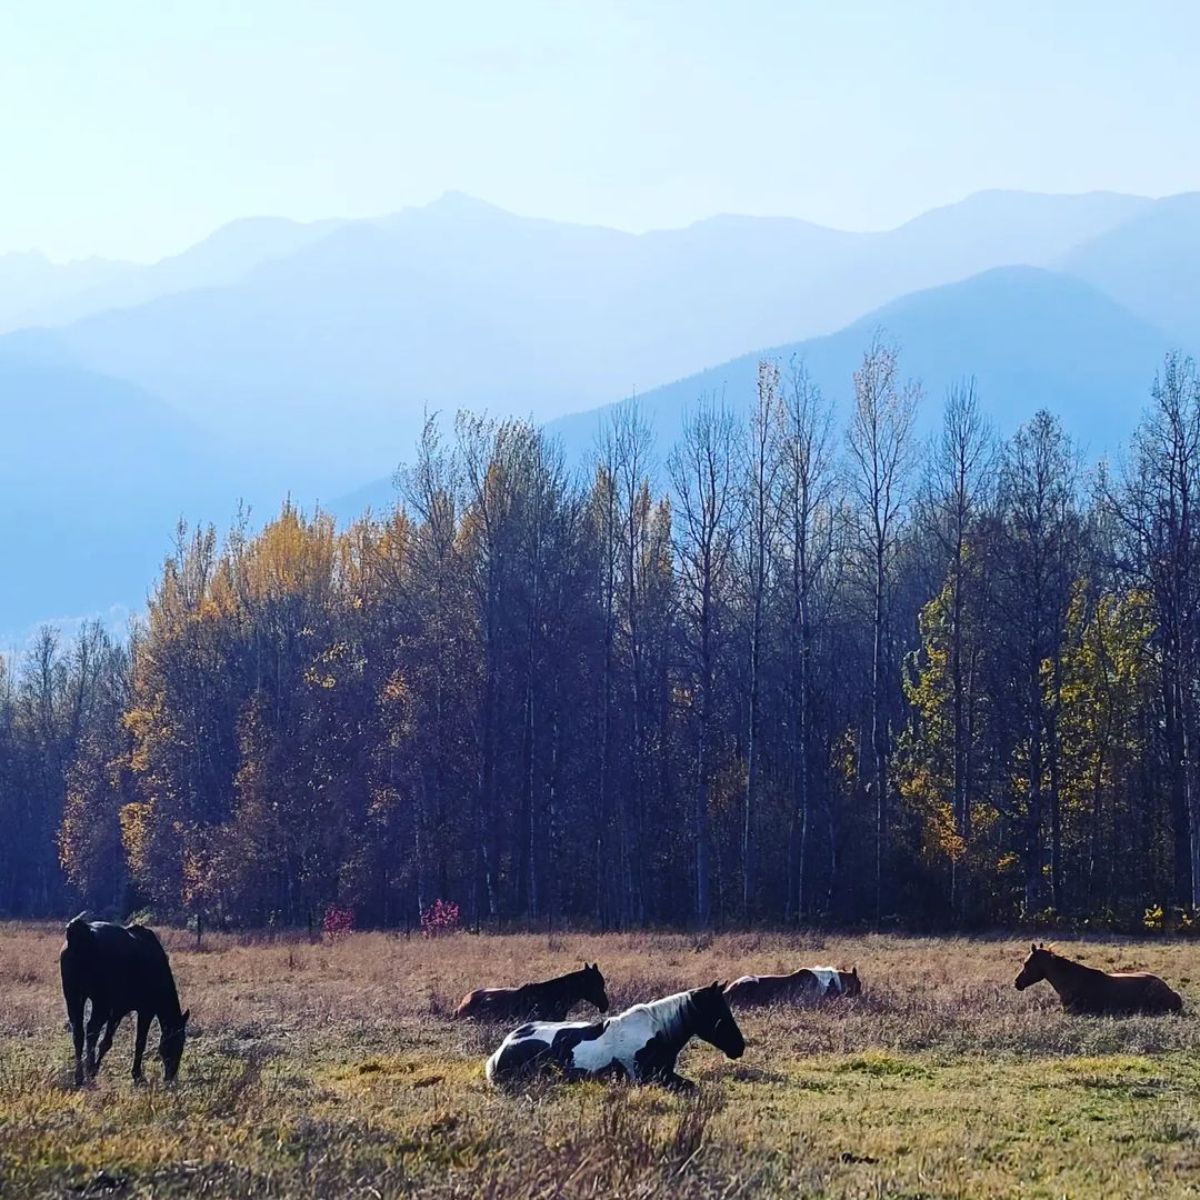 A herd of horses resting on a field.